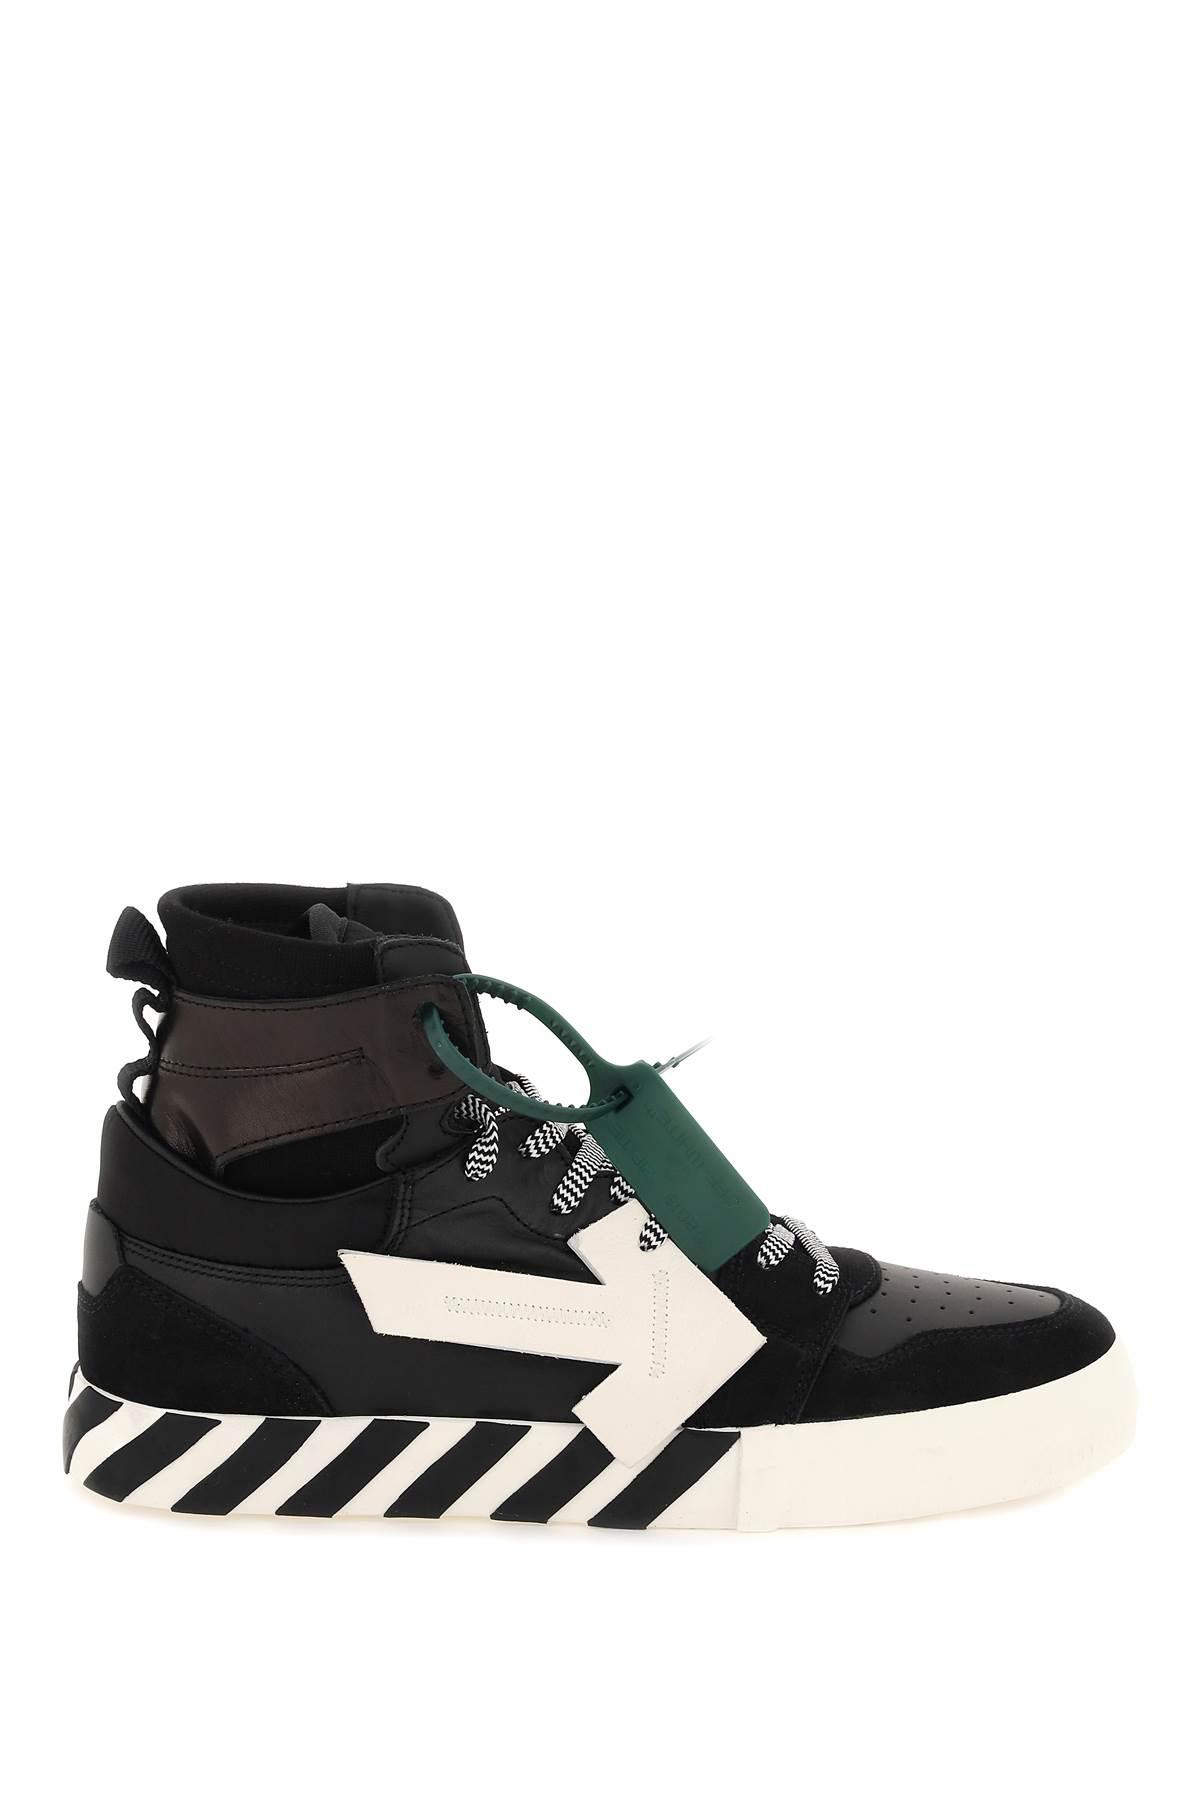 OFF-WHITE HIGH TOP VULANIZED SNEAKERS